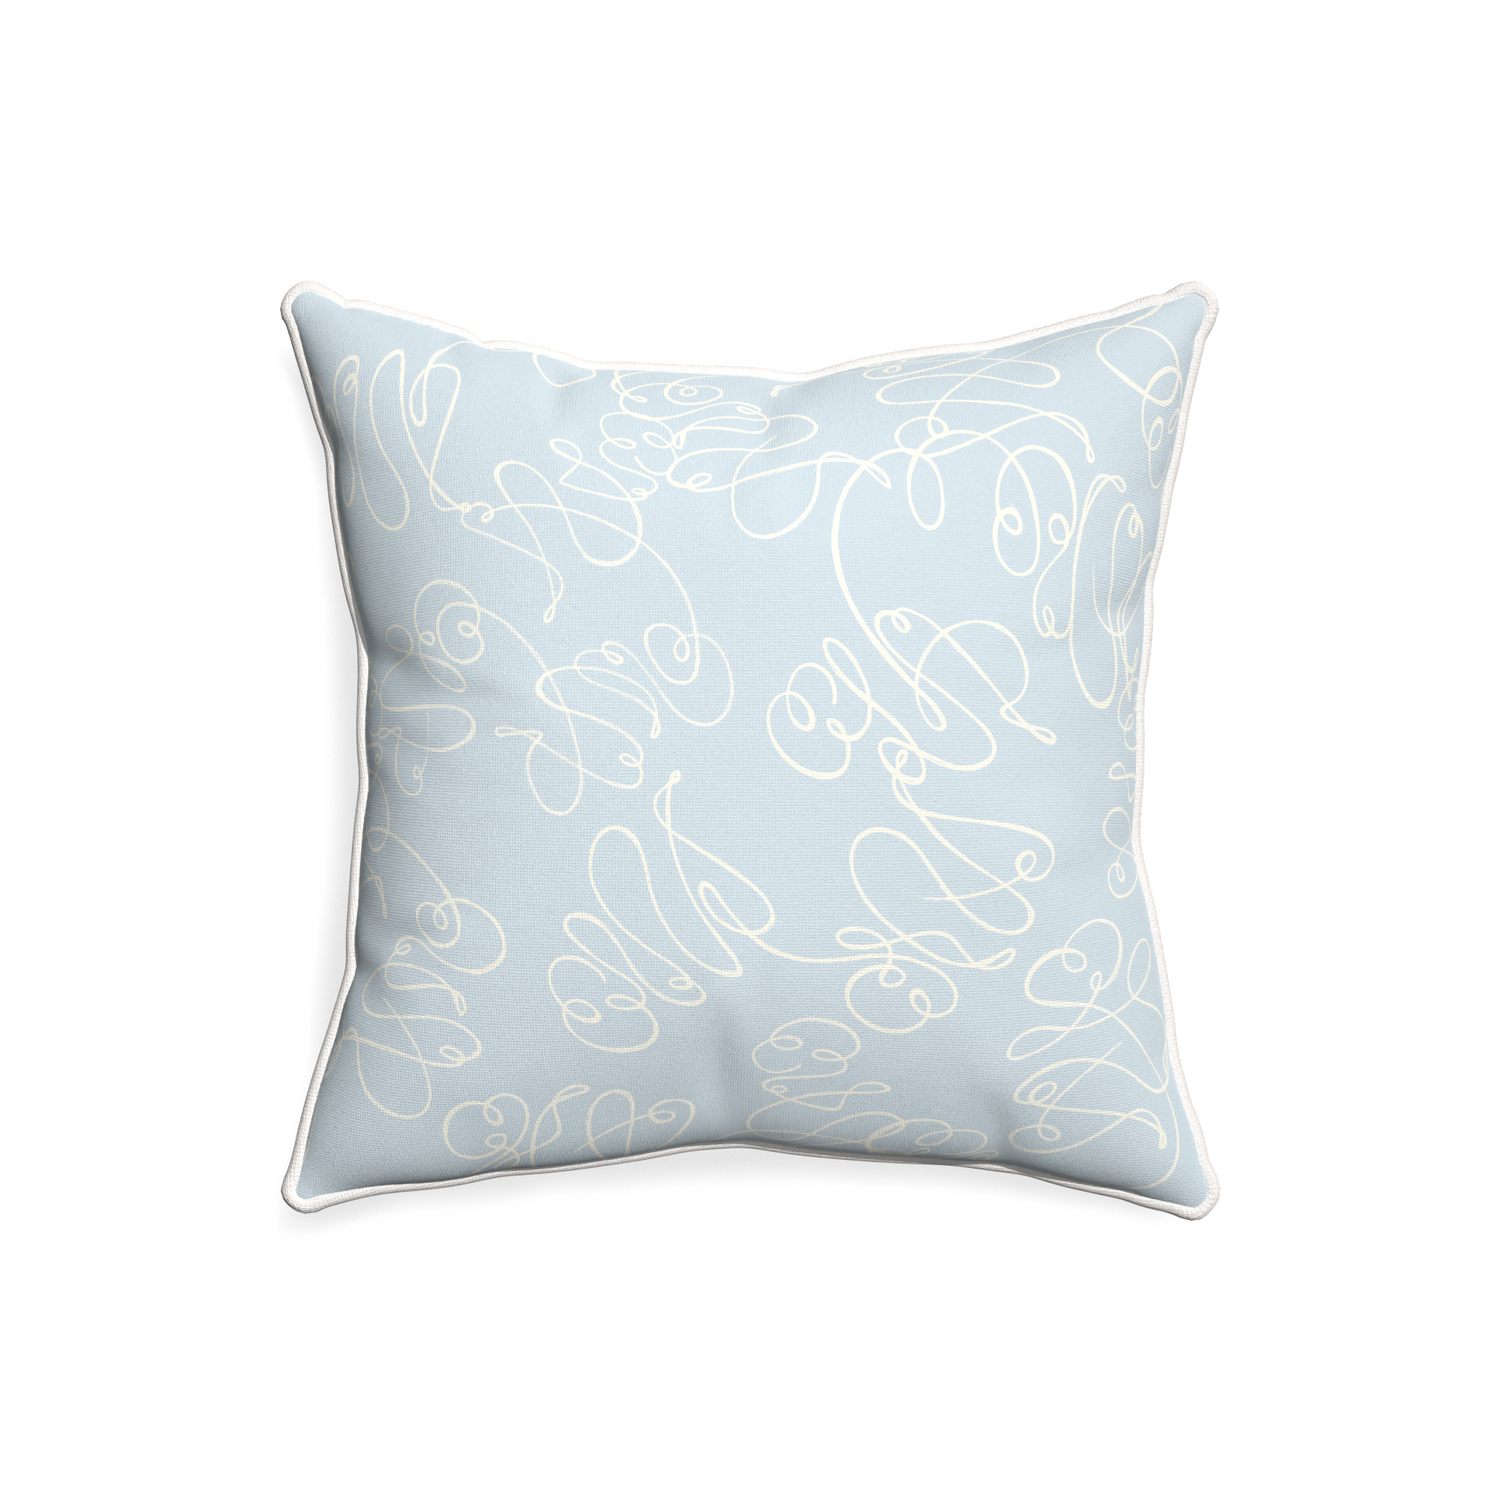 20-square mirabella custom powder blue abstractpillow with snow piping on white background